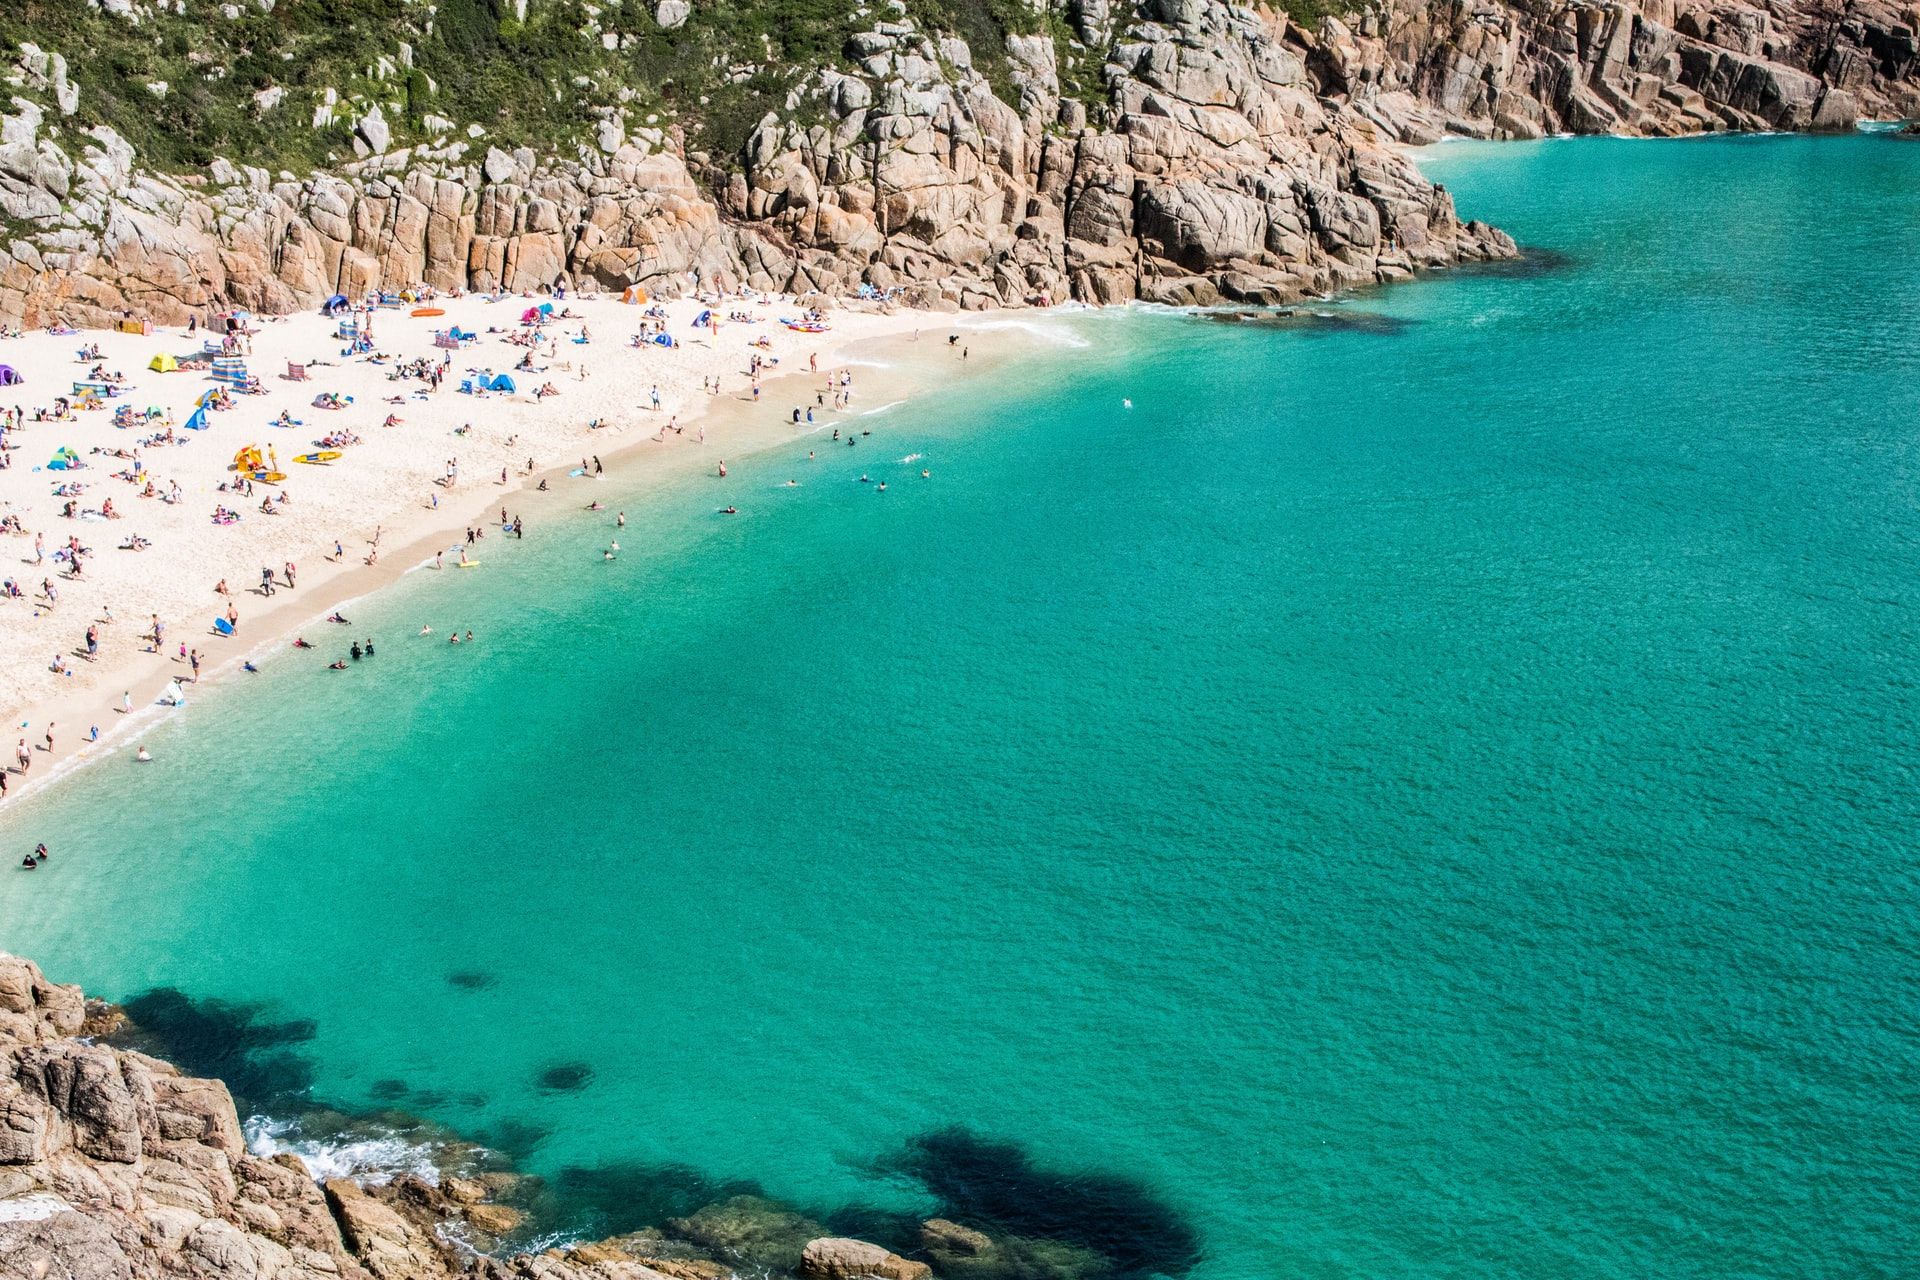 aerial-image-of-porthcurno-beach-from-above-by-minack-theatre-people-sunbathing-on-beach-beside-turquoise-waters-cornwall-hidden-gems